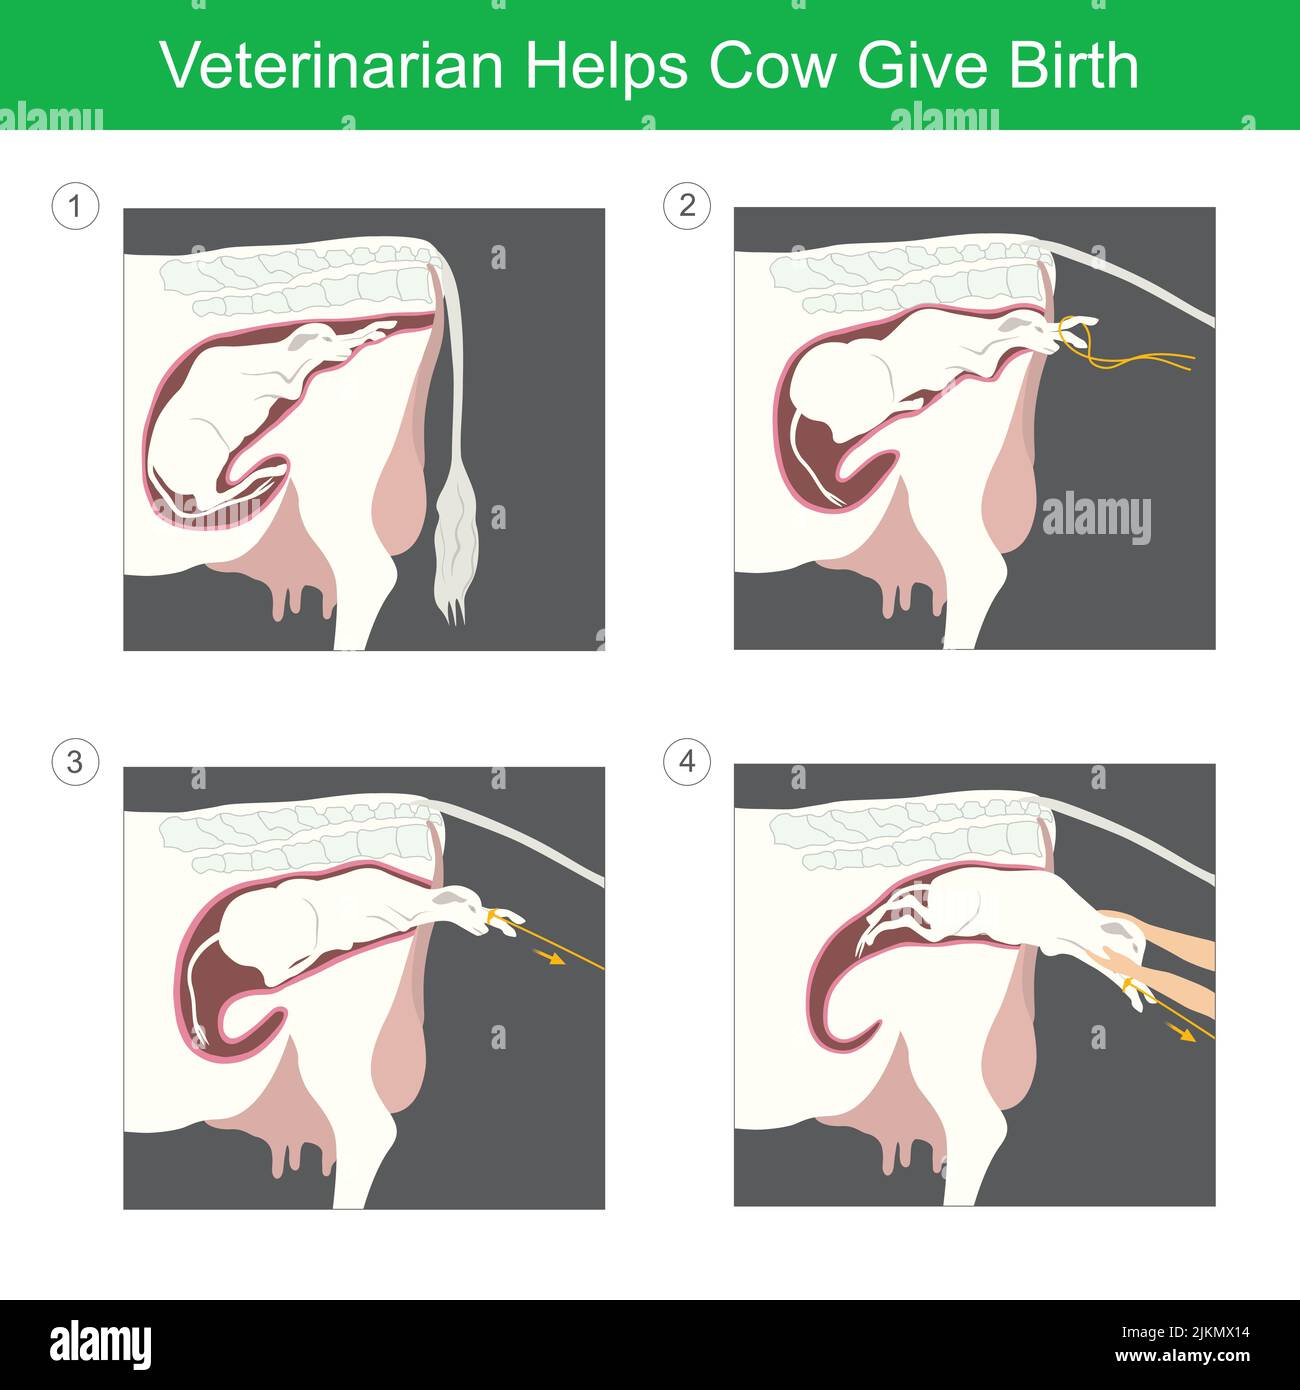 Veterinarian Helps Cow Give Birth. Illustration a calf first birth by it helps from the veterinarian. Stock Vector